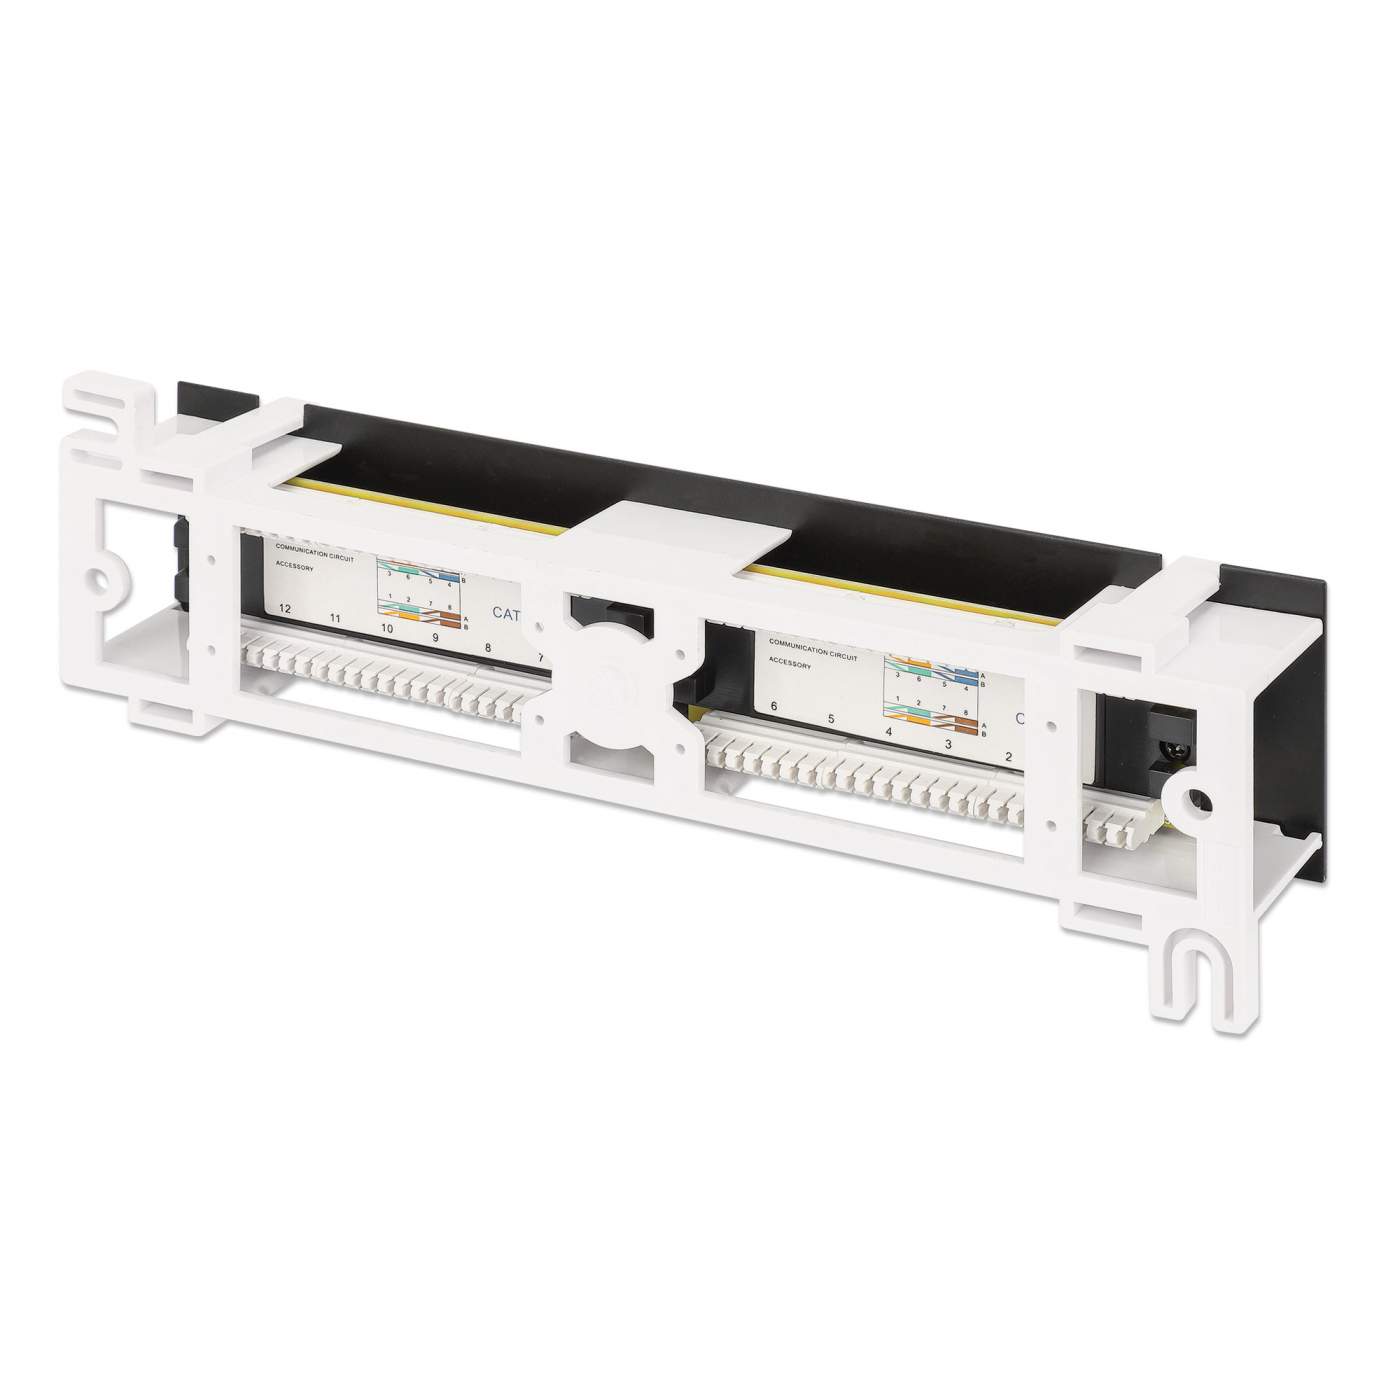 Cat6 Wall-mount Patch Panel Image 5